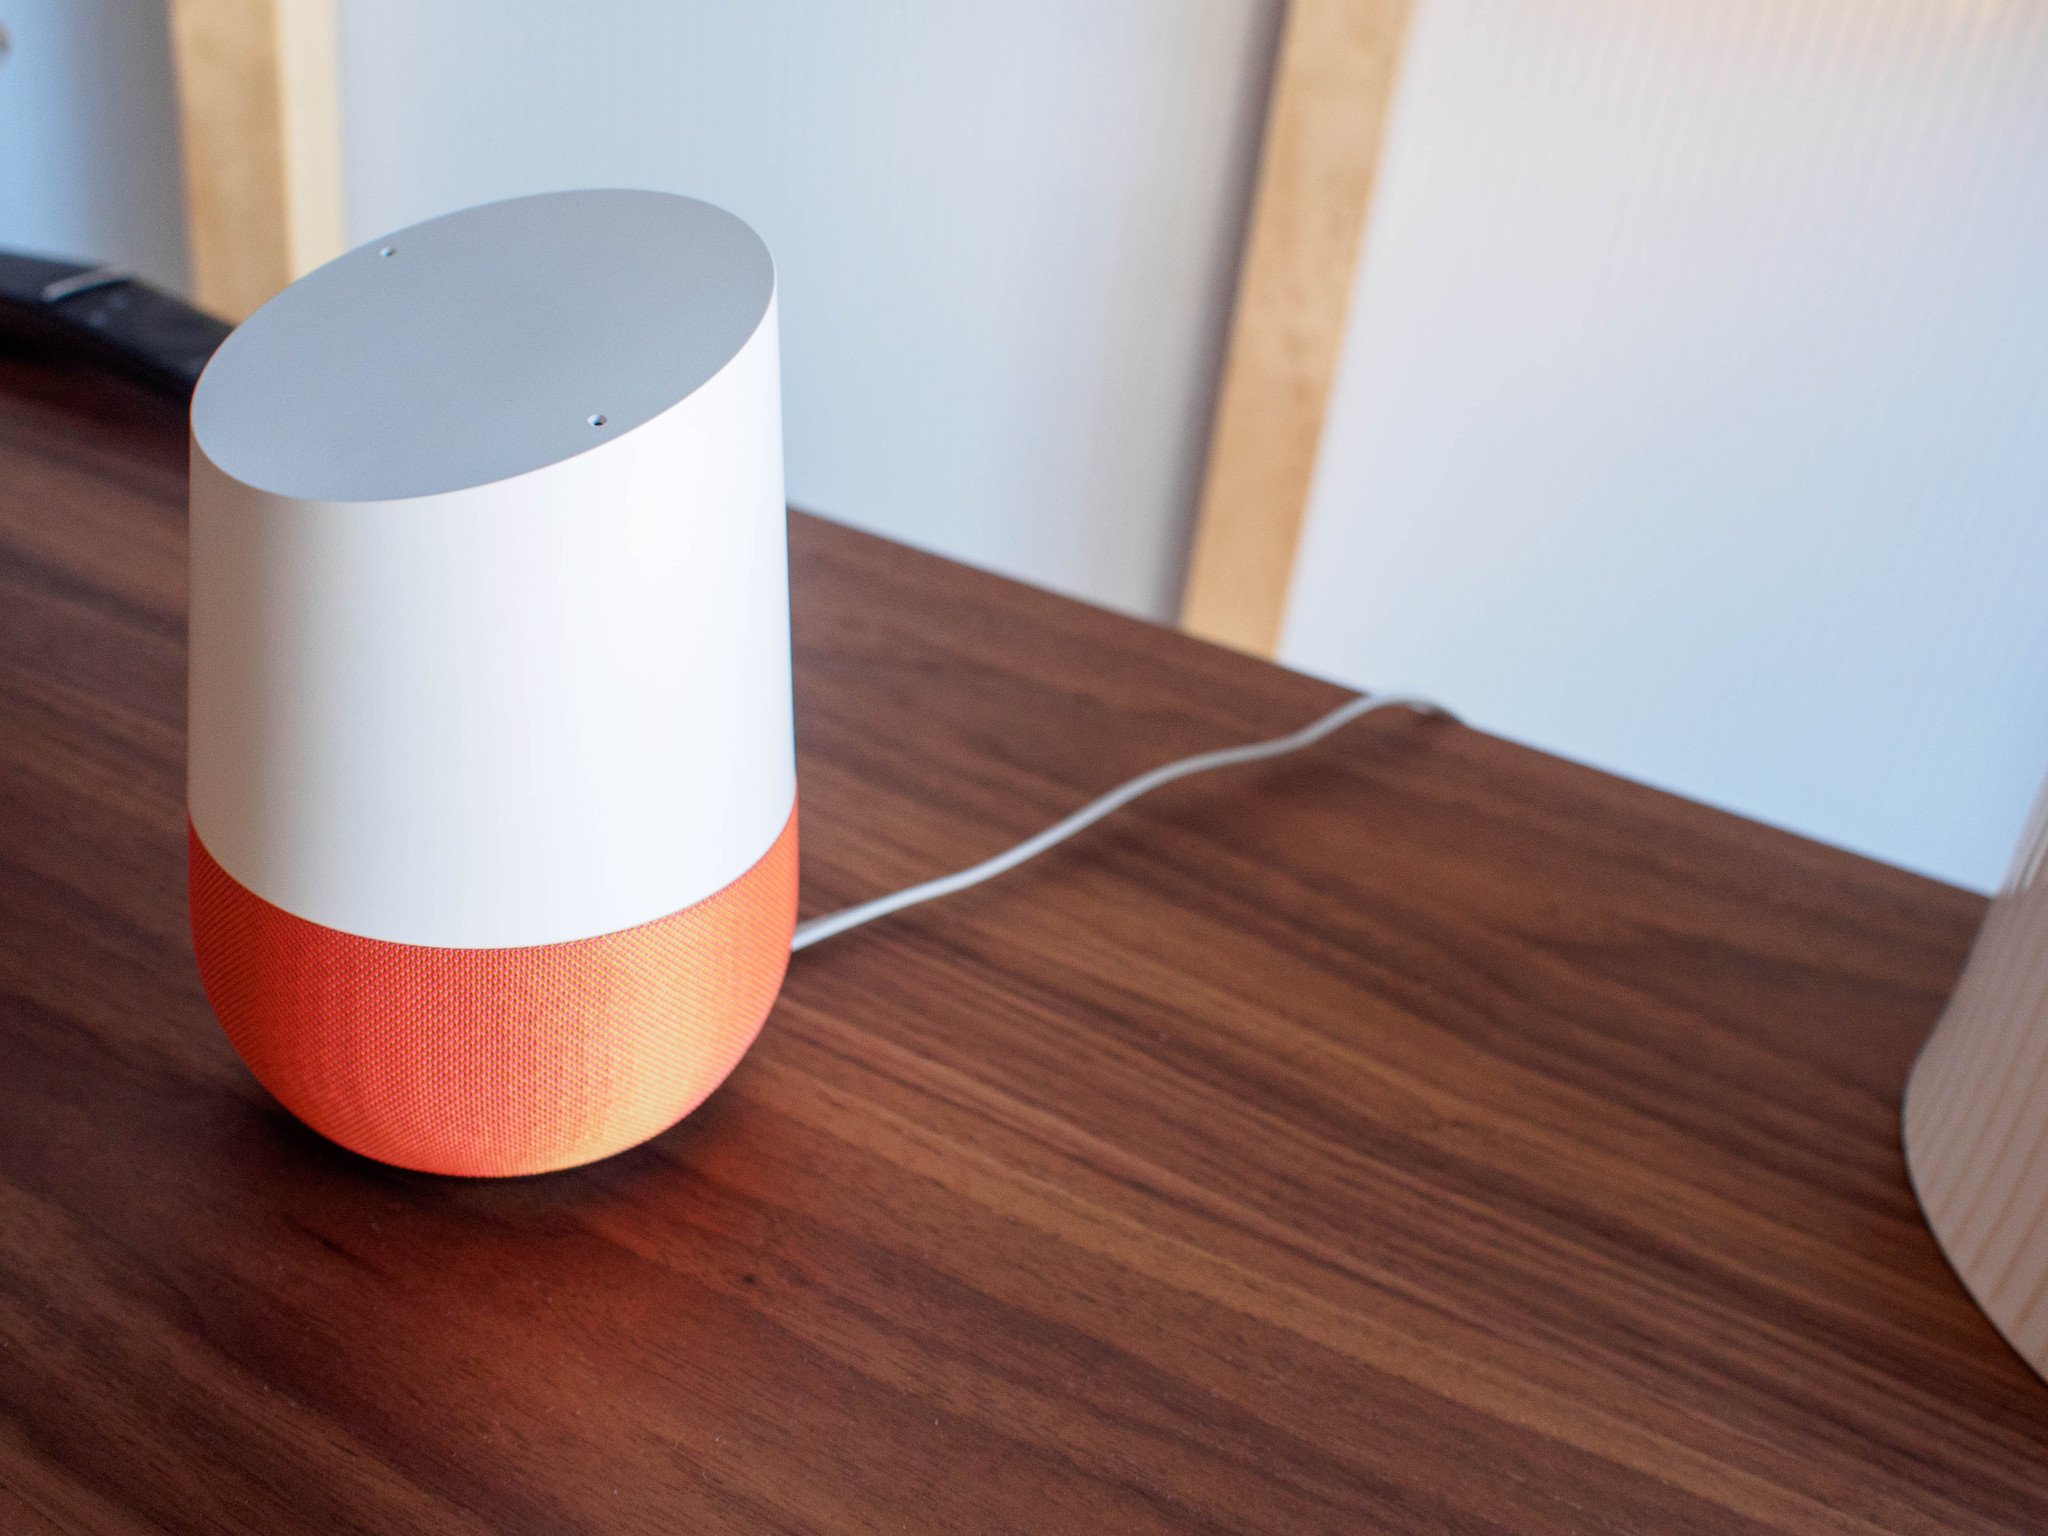 Which products and services work with Google Home now?